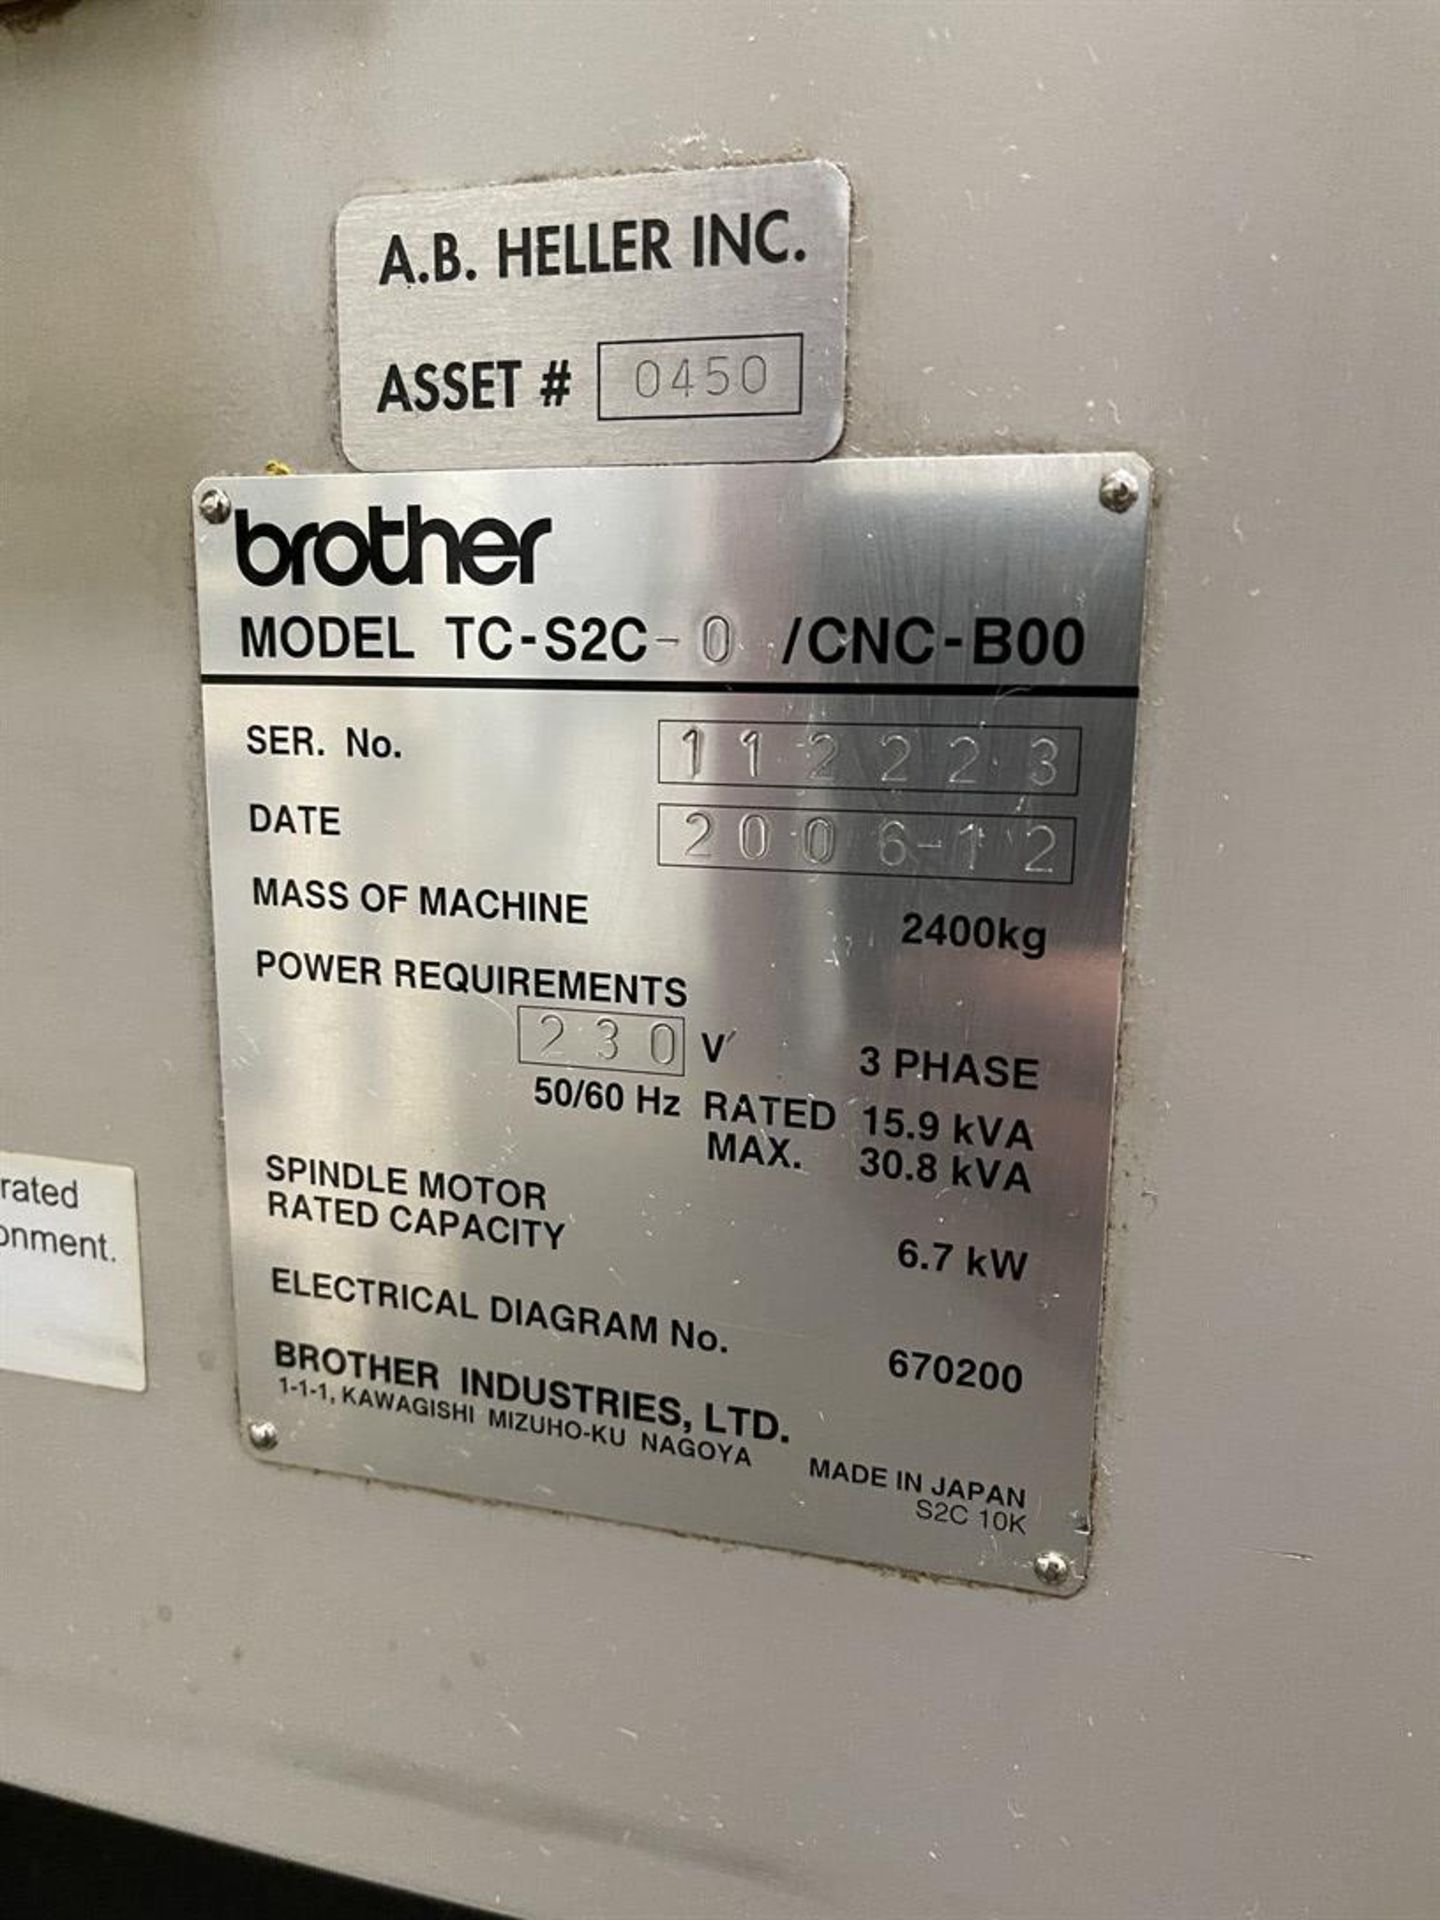 2006 BROTHER TC-S2C-O CNC Tapping Center, s/n 112223, 12.5" x 31.5" Table, 20-ATC, BT30 Spindle - Image 7 of 7